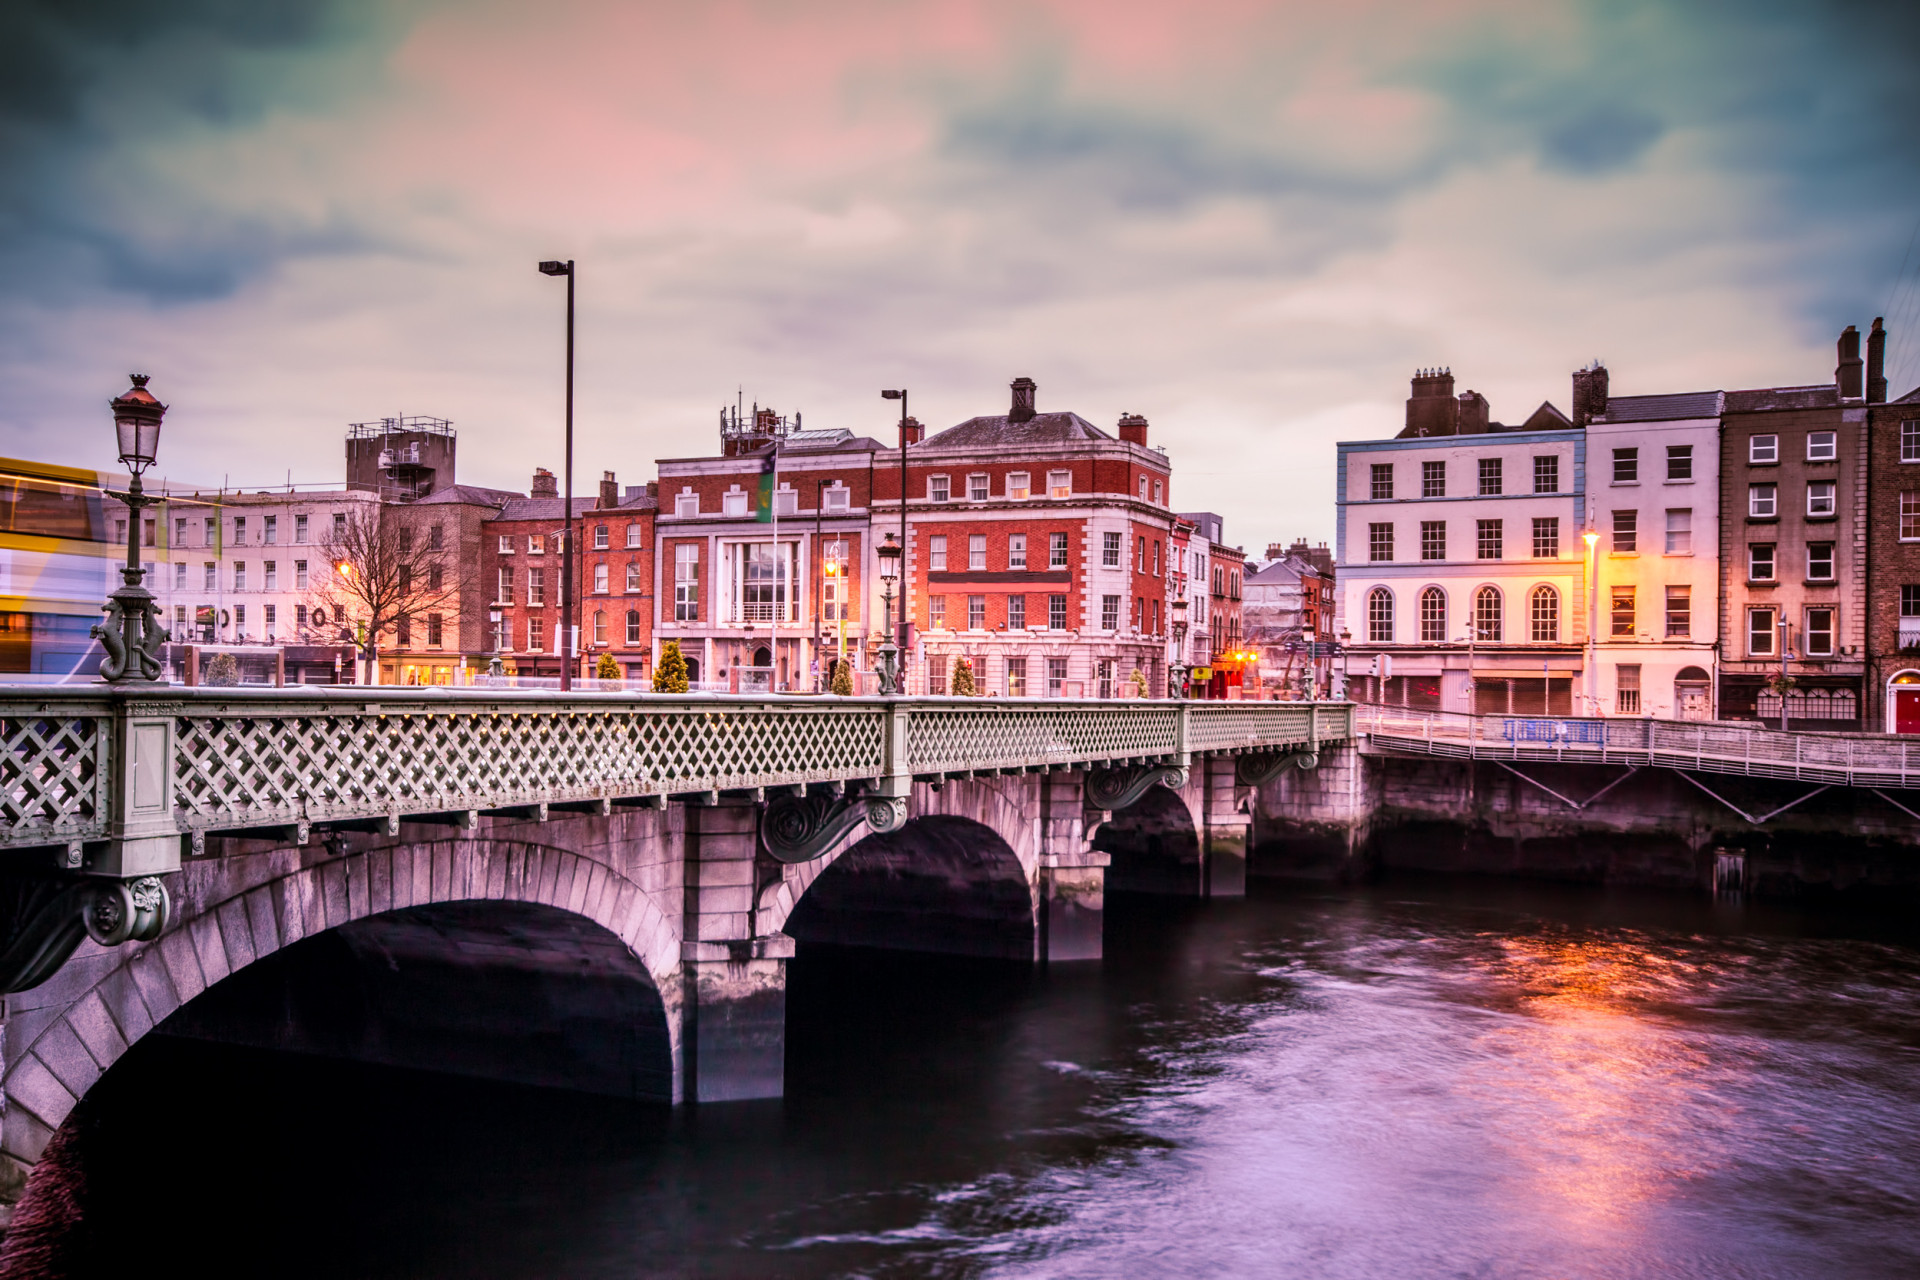 The Irish capital is known for its unpredictable weather and selection of pubs. Dublin is also a flat city and very accessible by foot. Taking a stroll along the River Liffey, which divides the city in two, is definitely recommended. <p><a href="https://www.msn.com/en-sg/community/channel/vid-7xx8mnucu55yw63we9va2gwr7uihbxwc68fxqp25x6tg4ftibpra?cvid=94631541bc0f4f89bfd59158d696ad7e">Follow us and access great exclusive content every day</a></p>